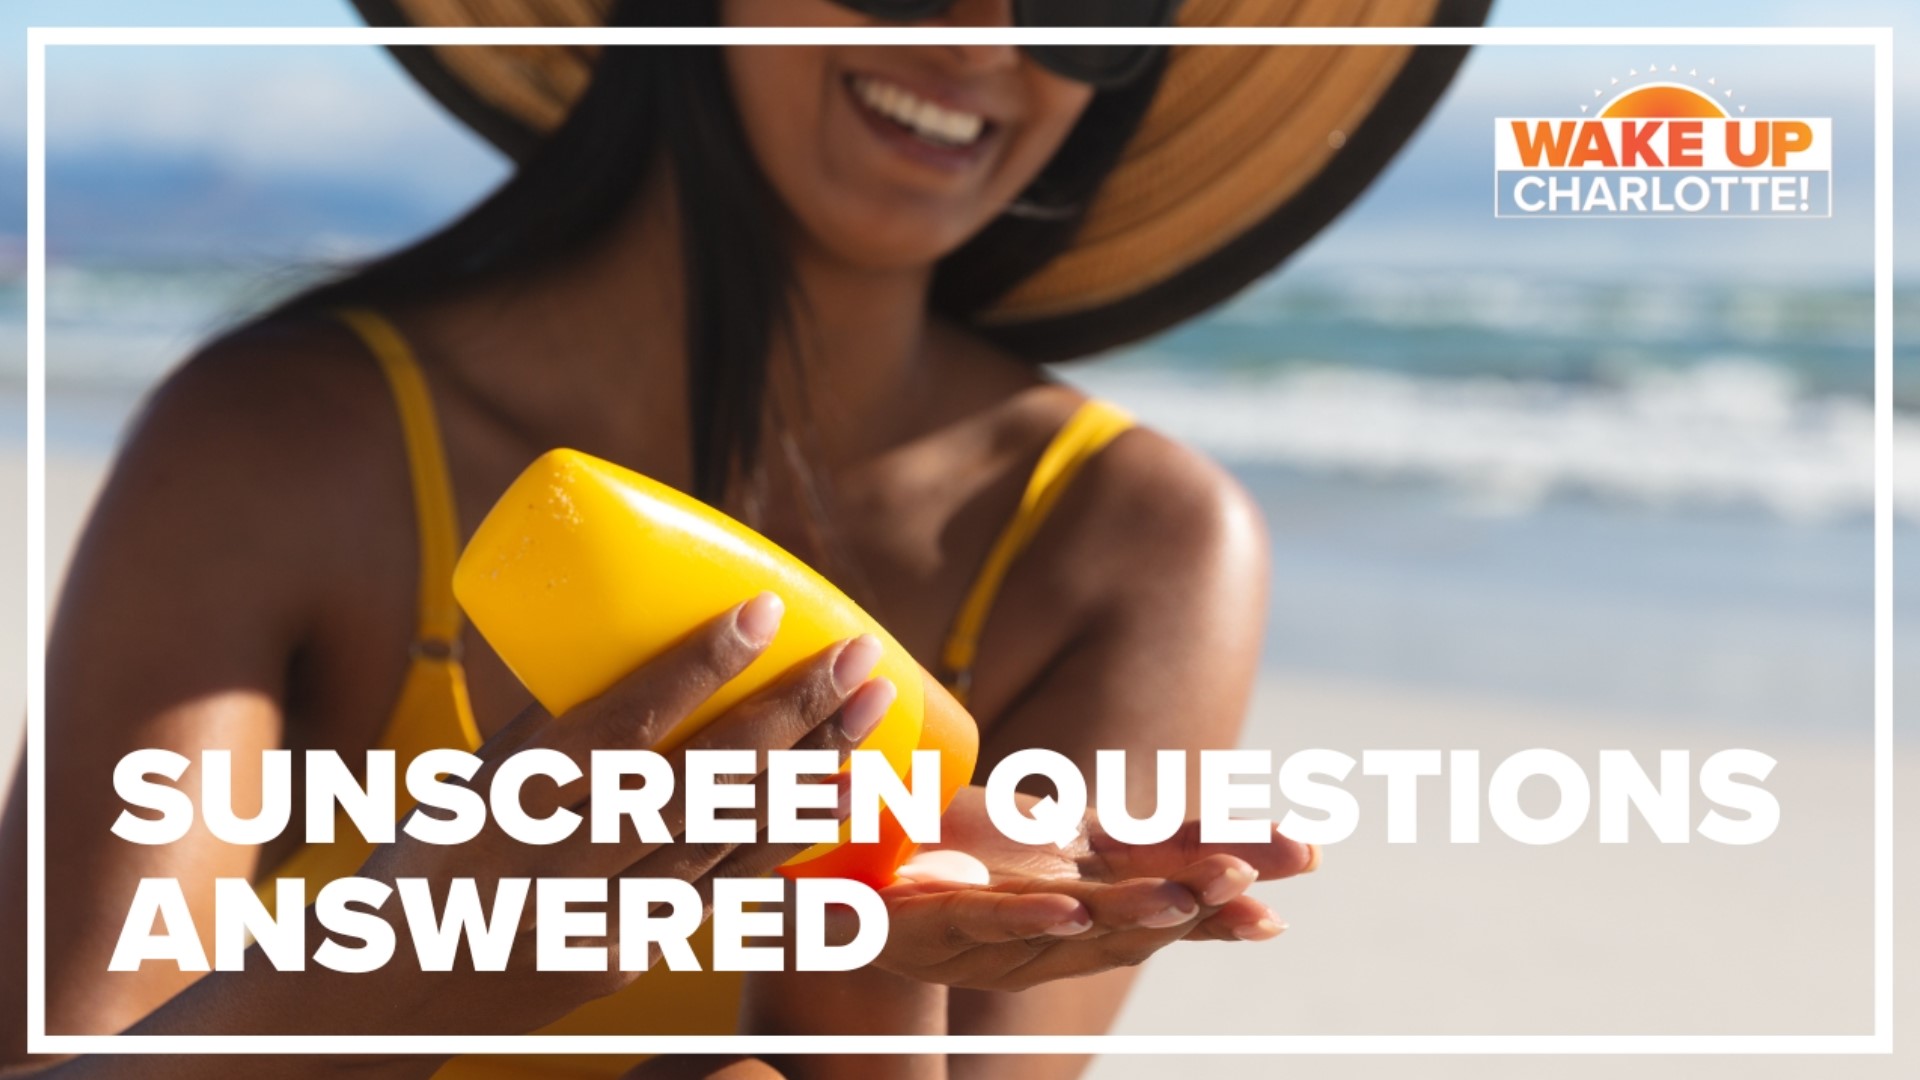 Don't forget the sunscreen! Your sunscreen questions answered.